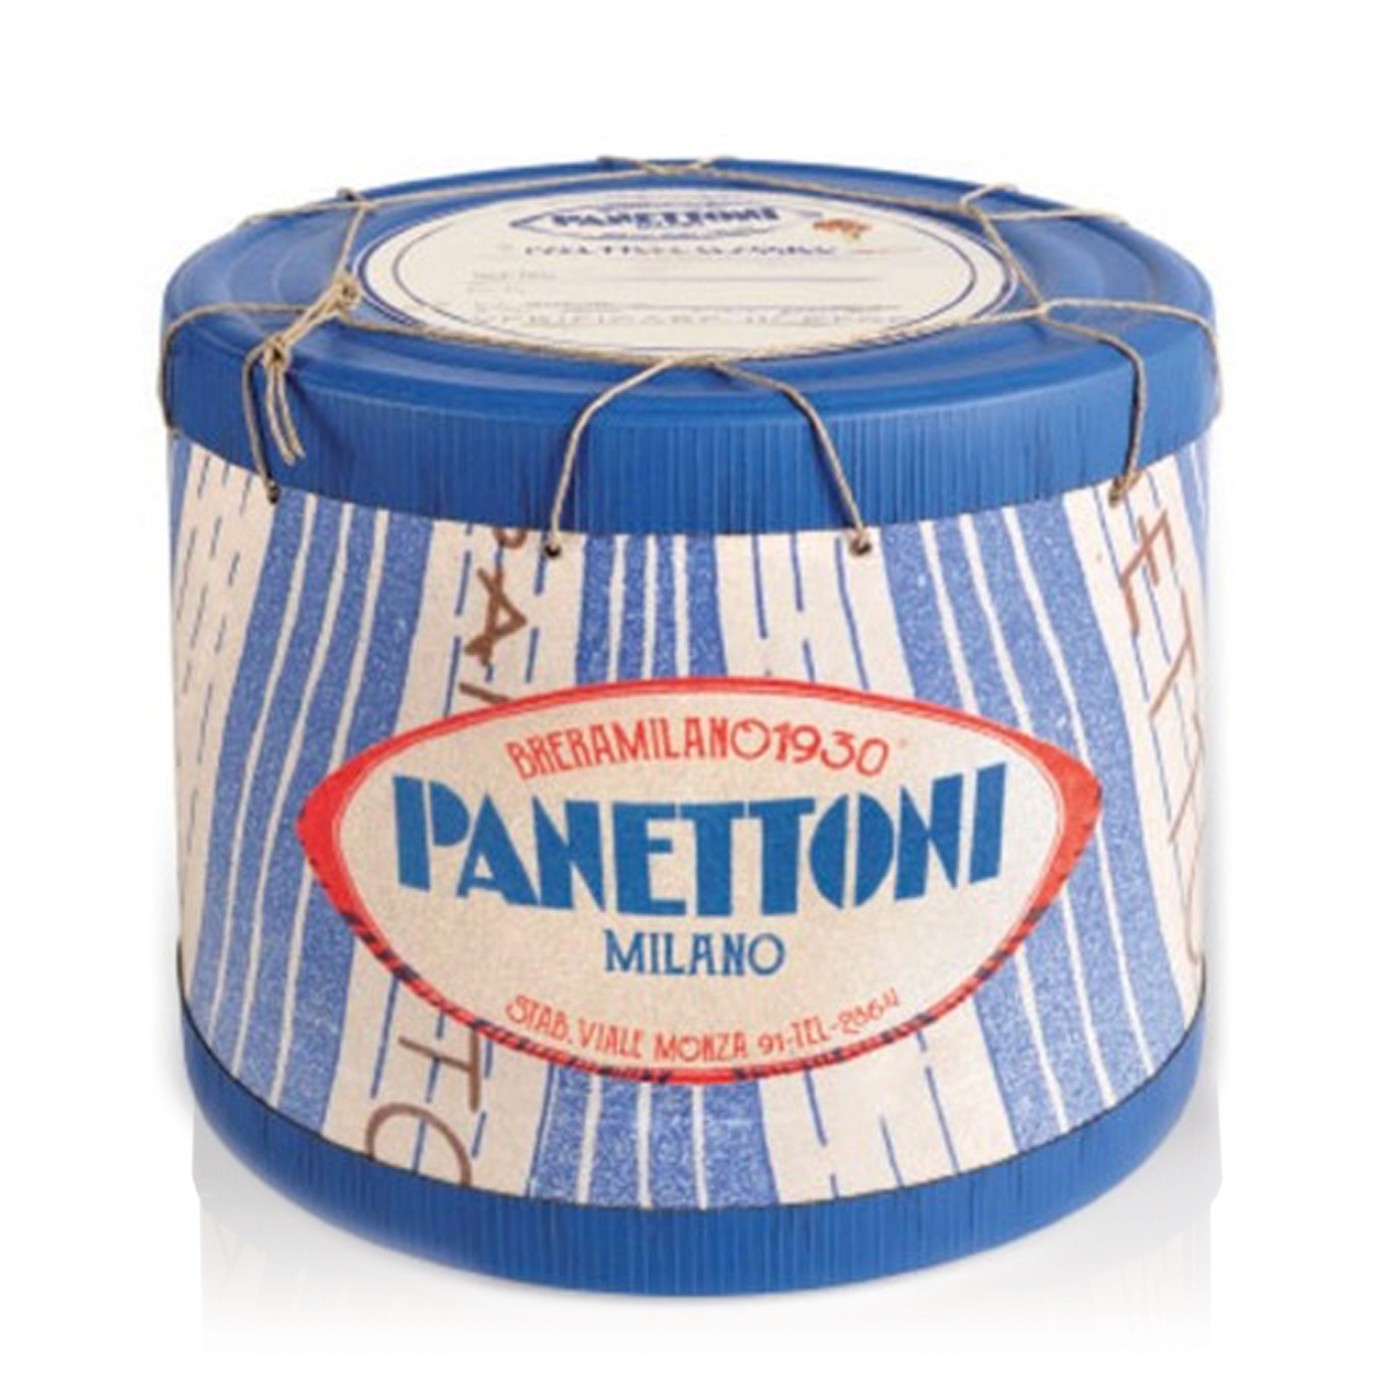 Panettone with Vintage Blue Box 22 lbs